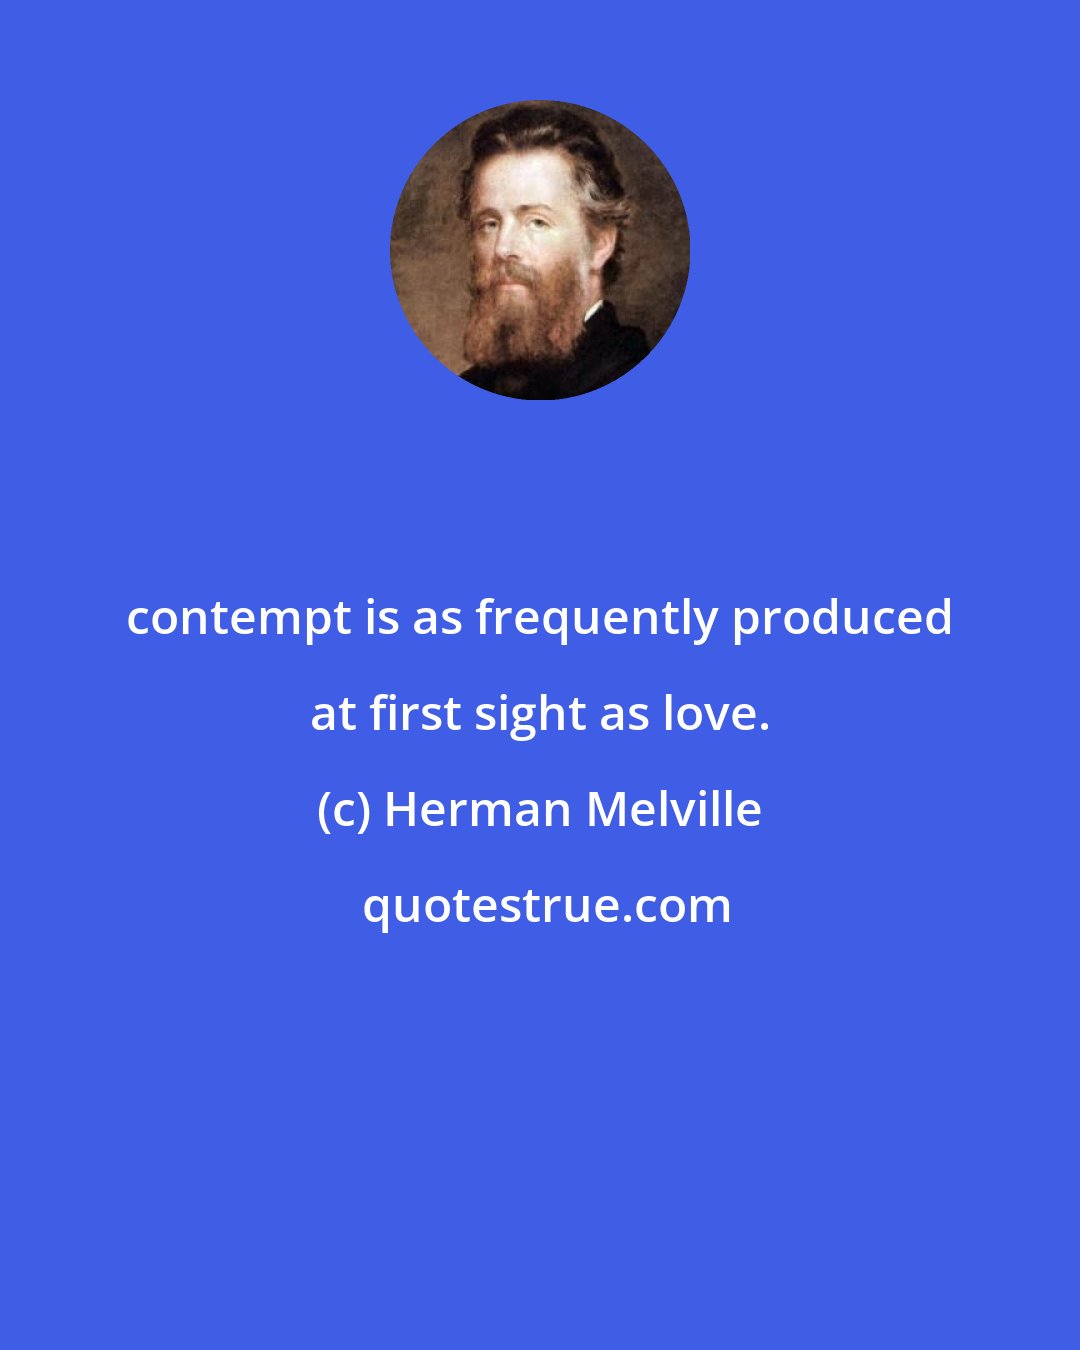 Herman Melville: contempt is as frequently produced at first sight as love.